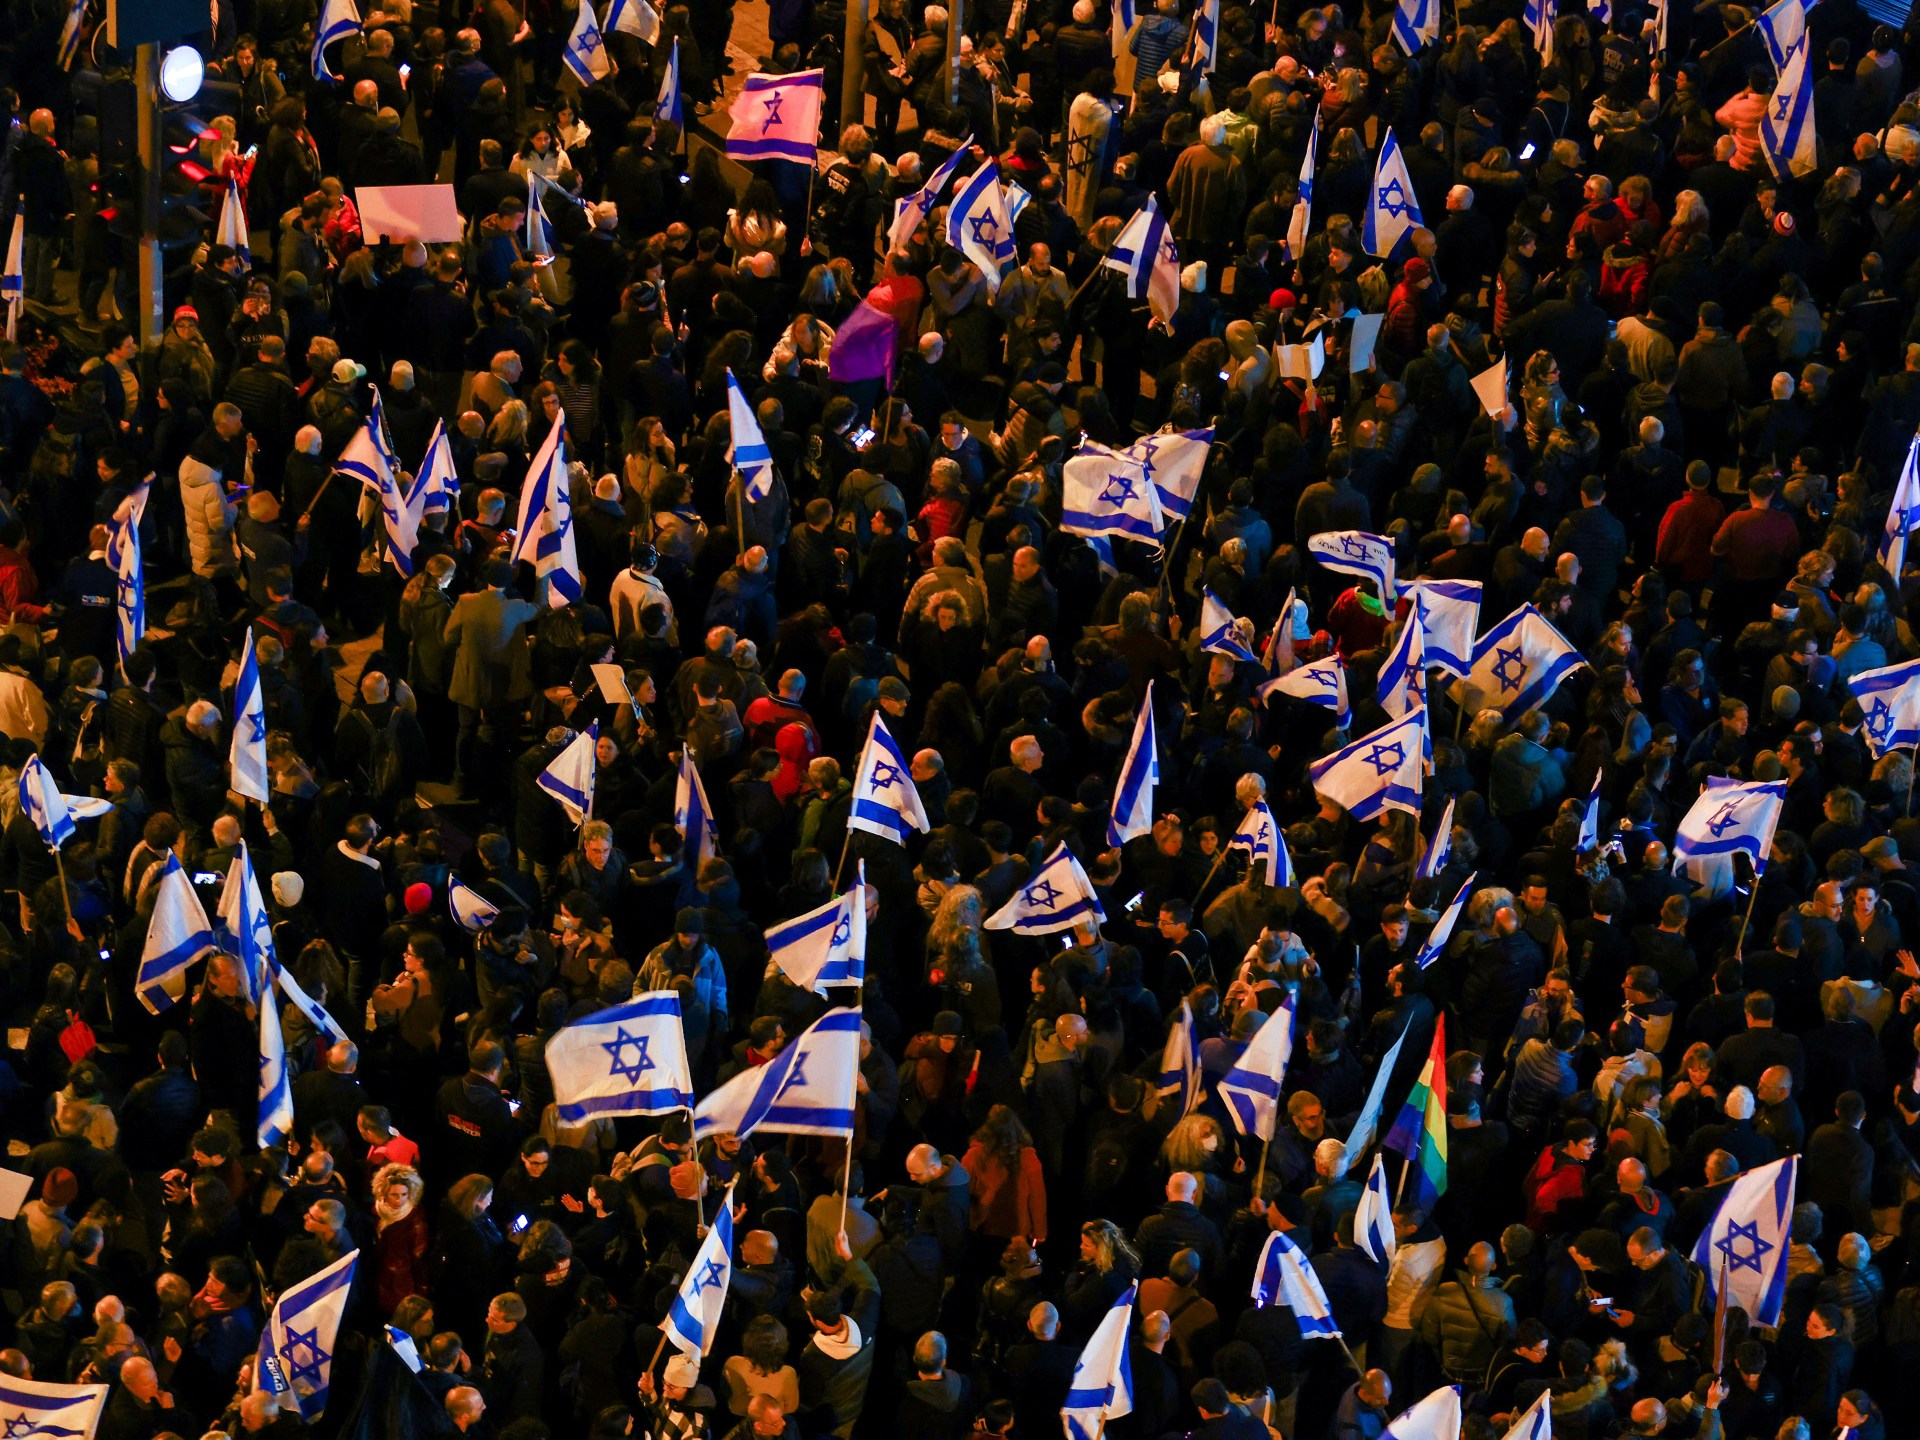 Israelis rally for fifth week in opposition to Netanyahu’s judicial plans